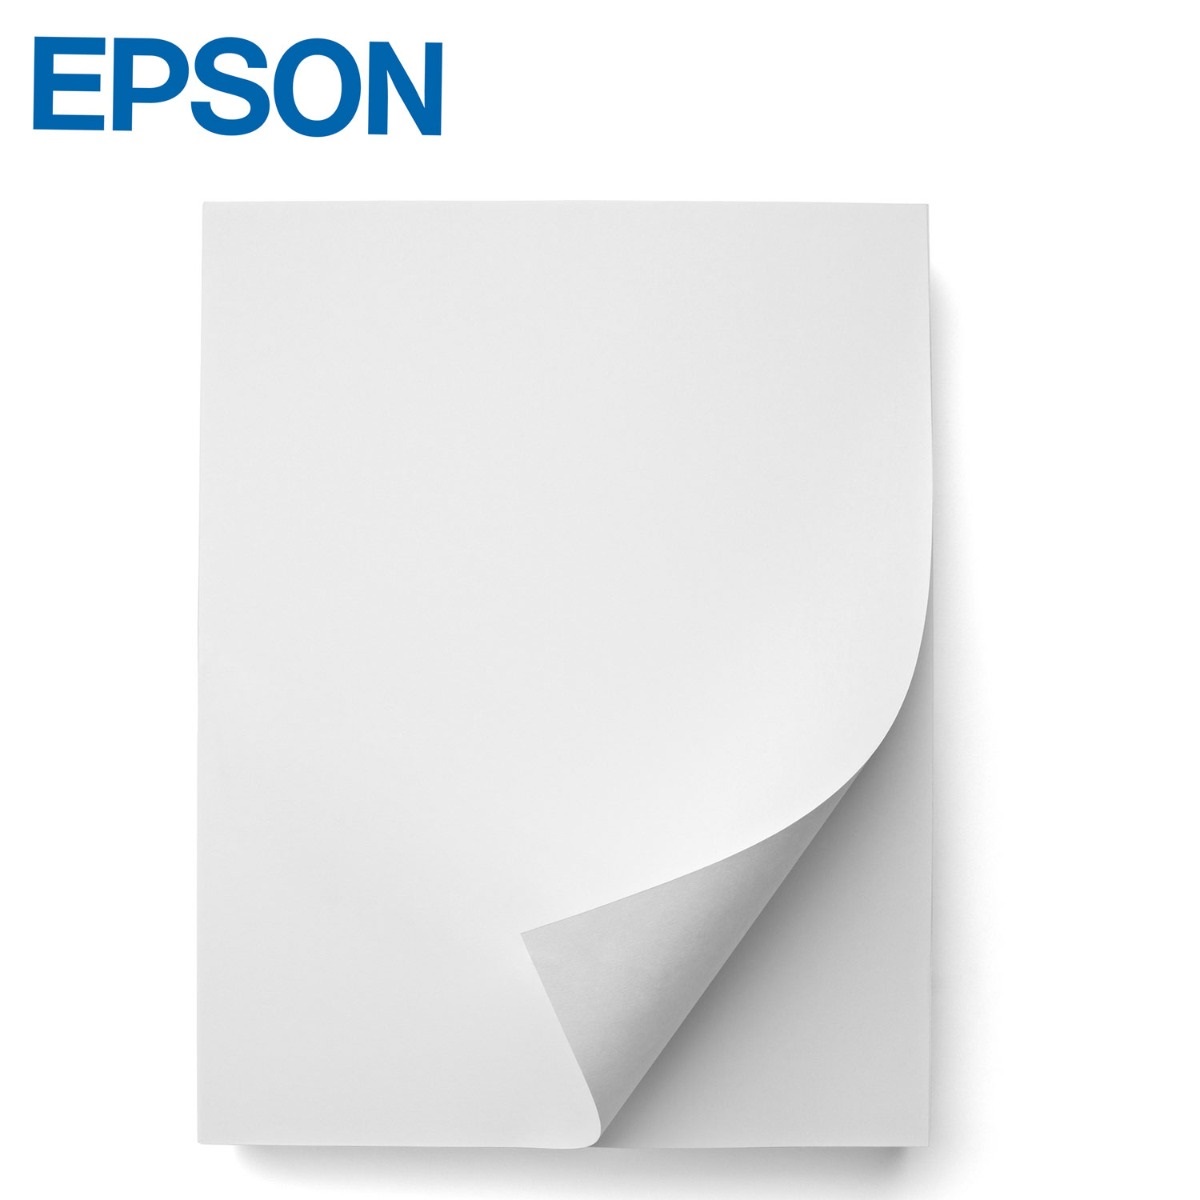 Epson Coated Paper (Luster/Gloss/Semigloss)